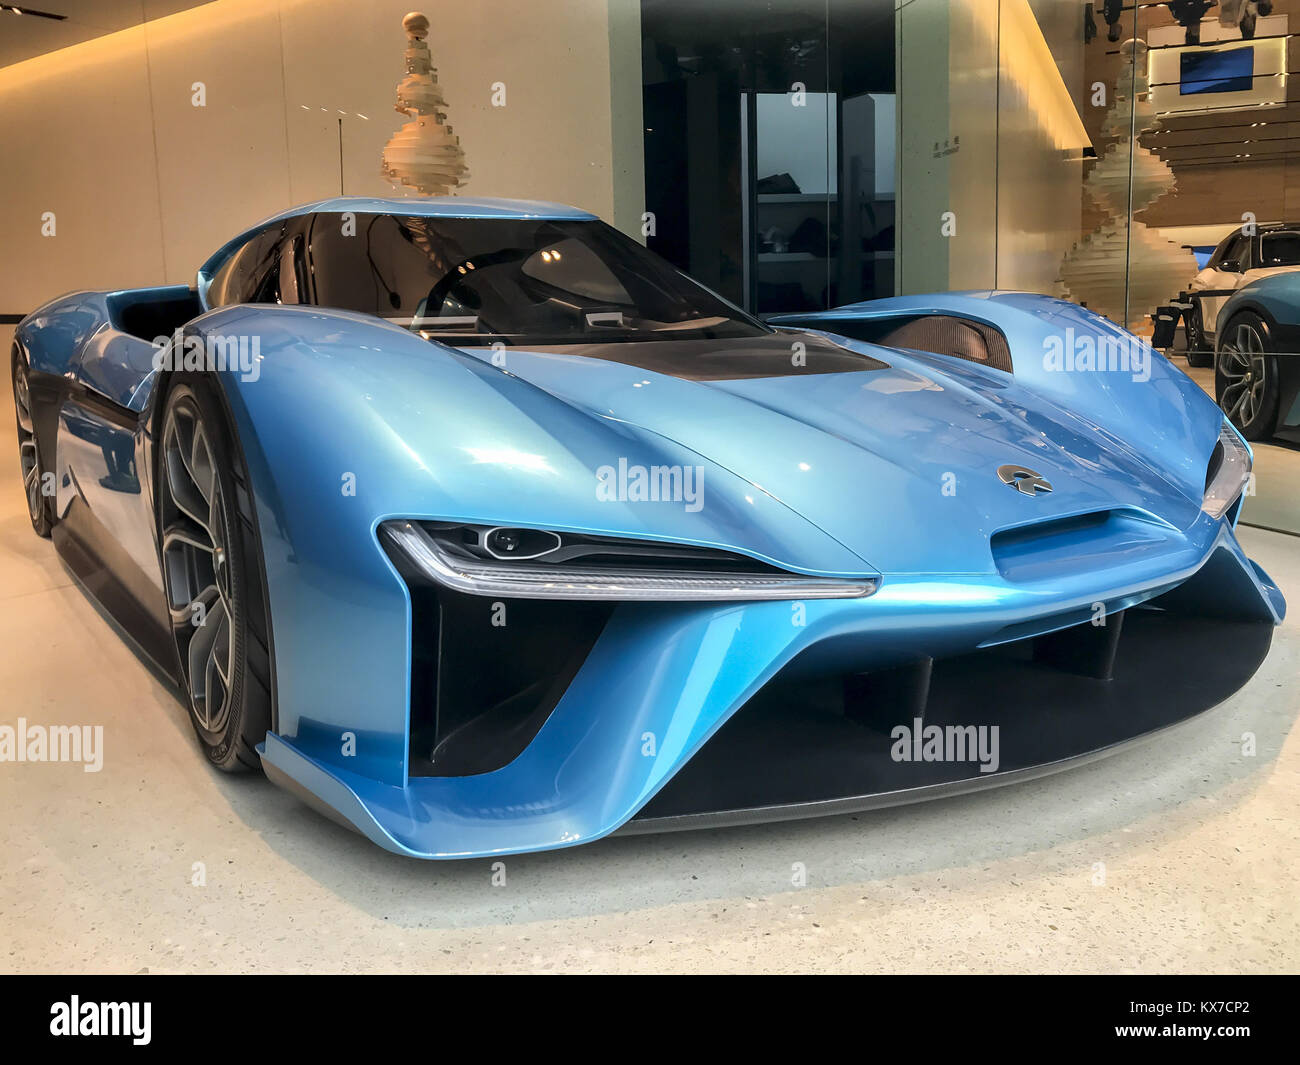 January 8, 2018 - Shanghai, China - The world's fastest electric supercar Nio EP9 can be seen on display at a shopping mall in Shanghai. (Credit Image: © SIPA Asia via ZUMA Wire) Stock Photo